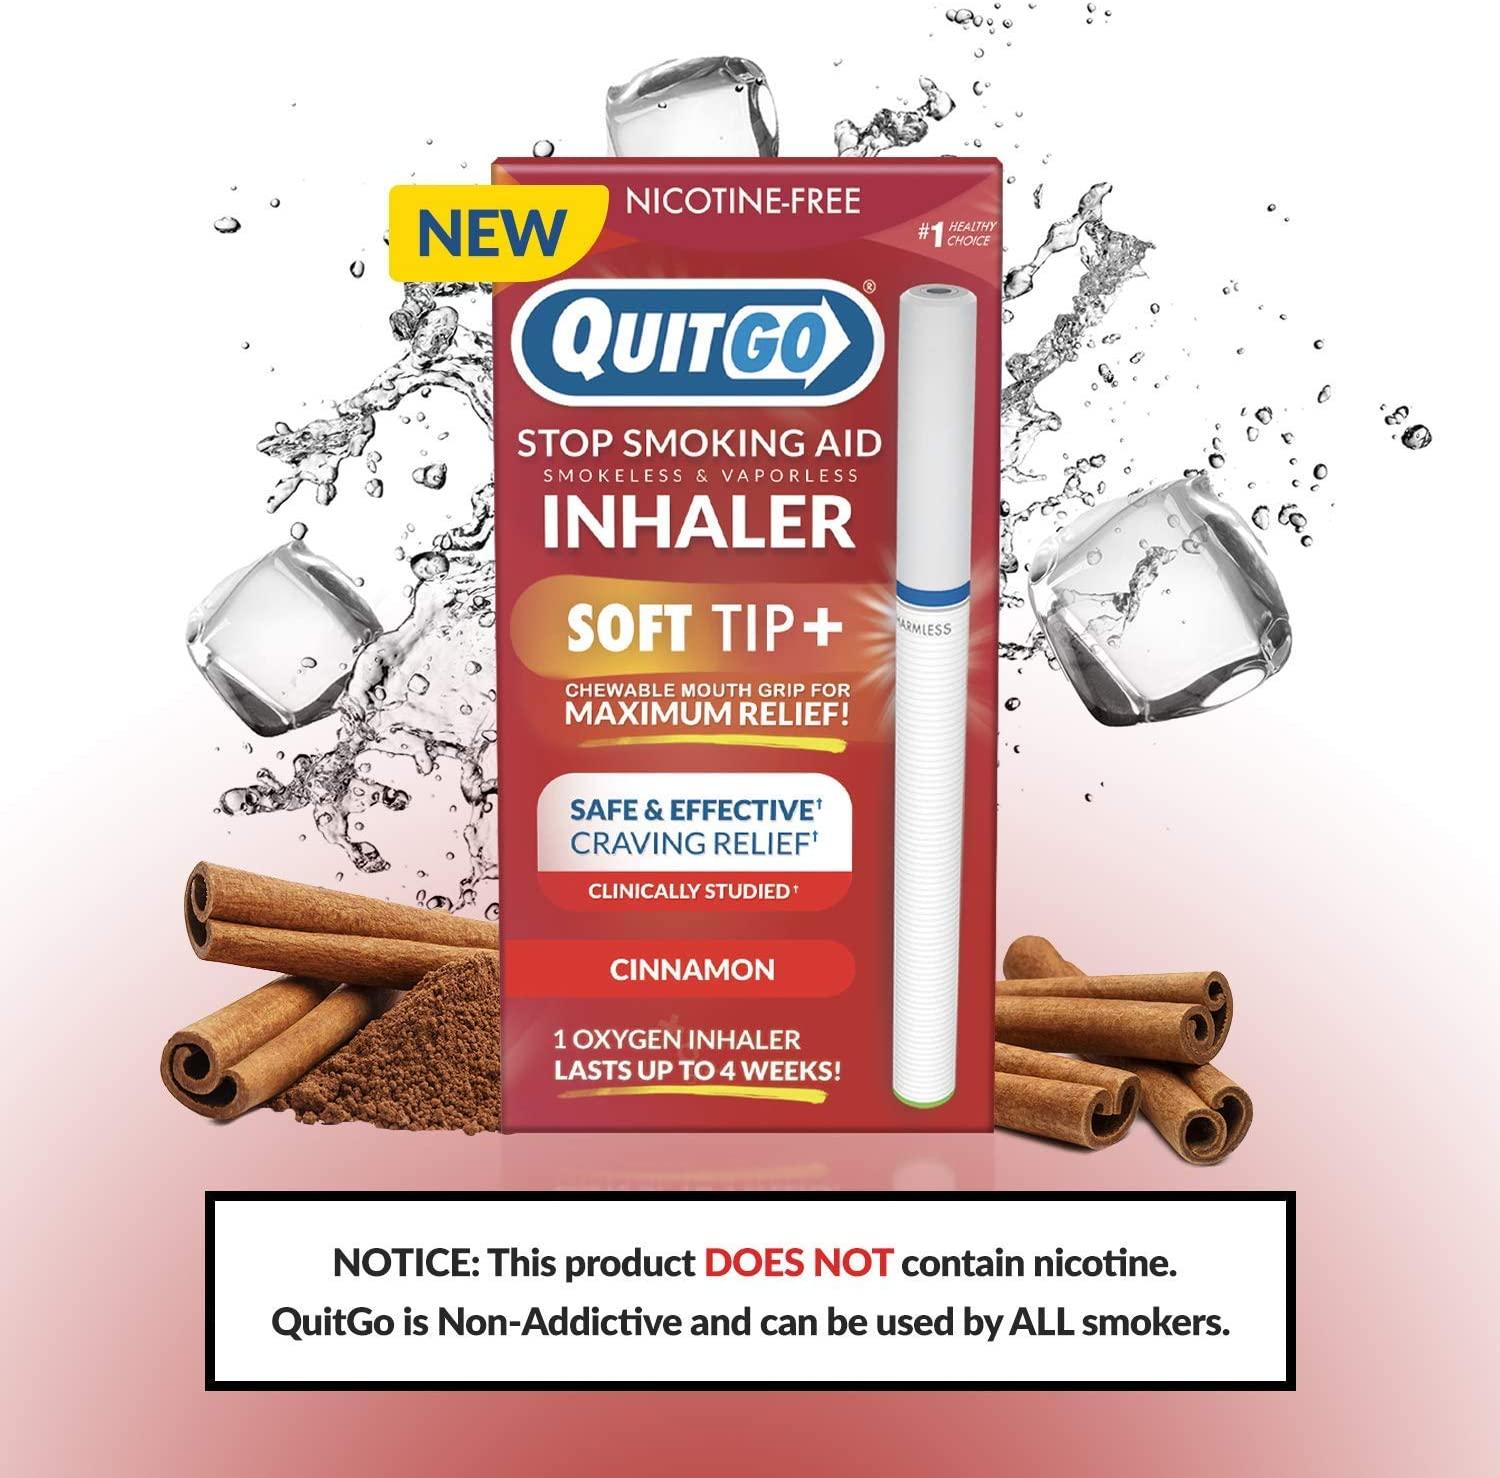 Quit Smoking Aid Oxygen Inhaler + Soft Tip Chewable Filter to Help Curb  Cravings, Nicotine Free Non-Addictive Stop Smoking Support & Oral Fixation  Relief (1 Pack, Cinnamon)